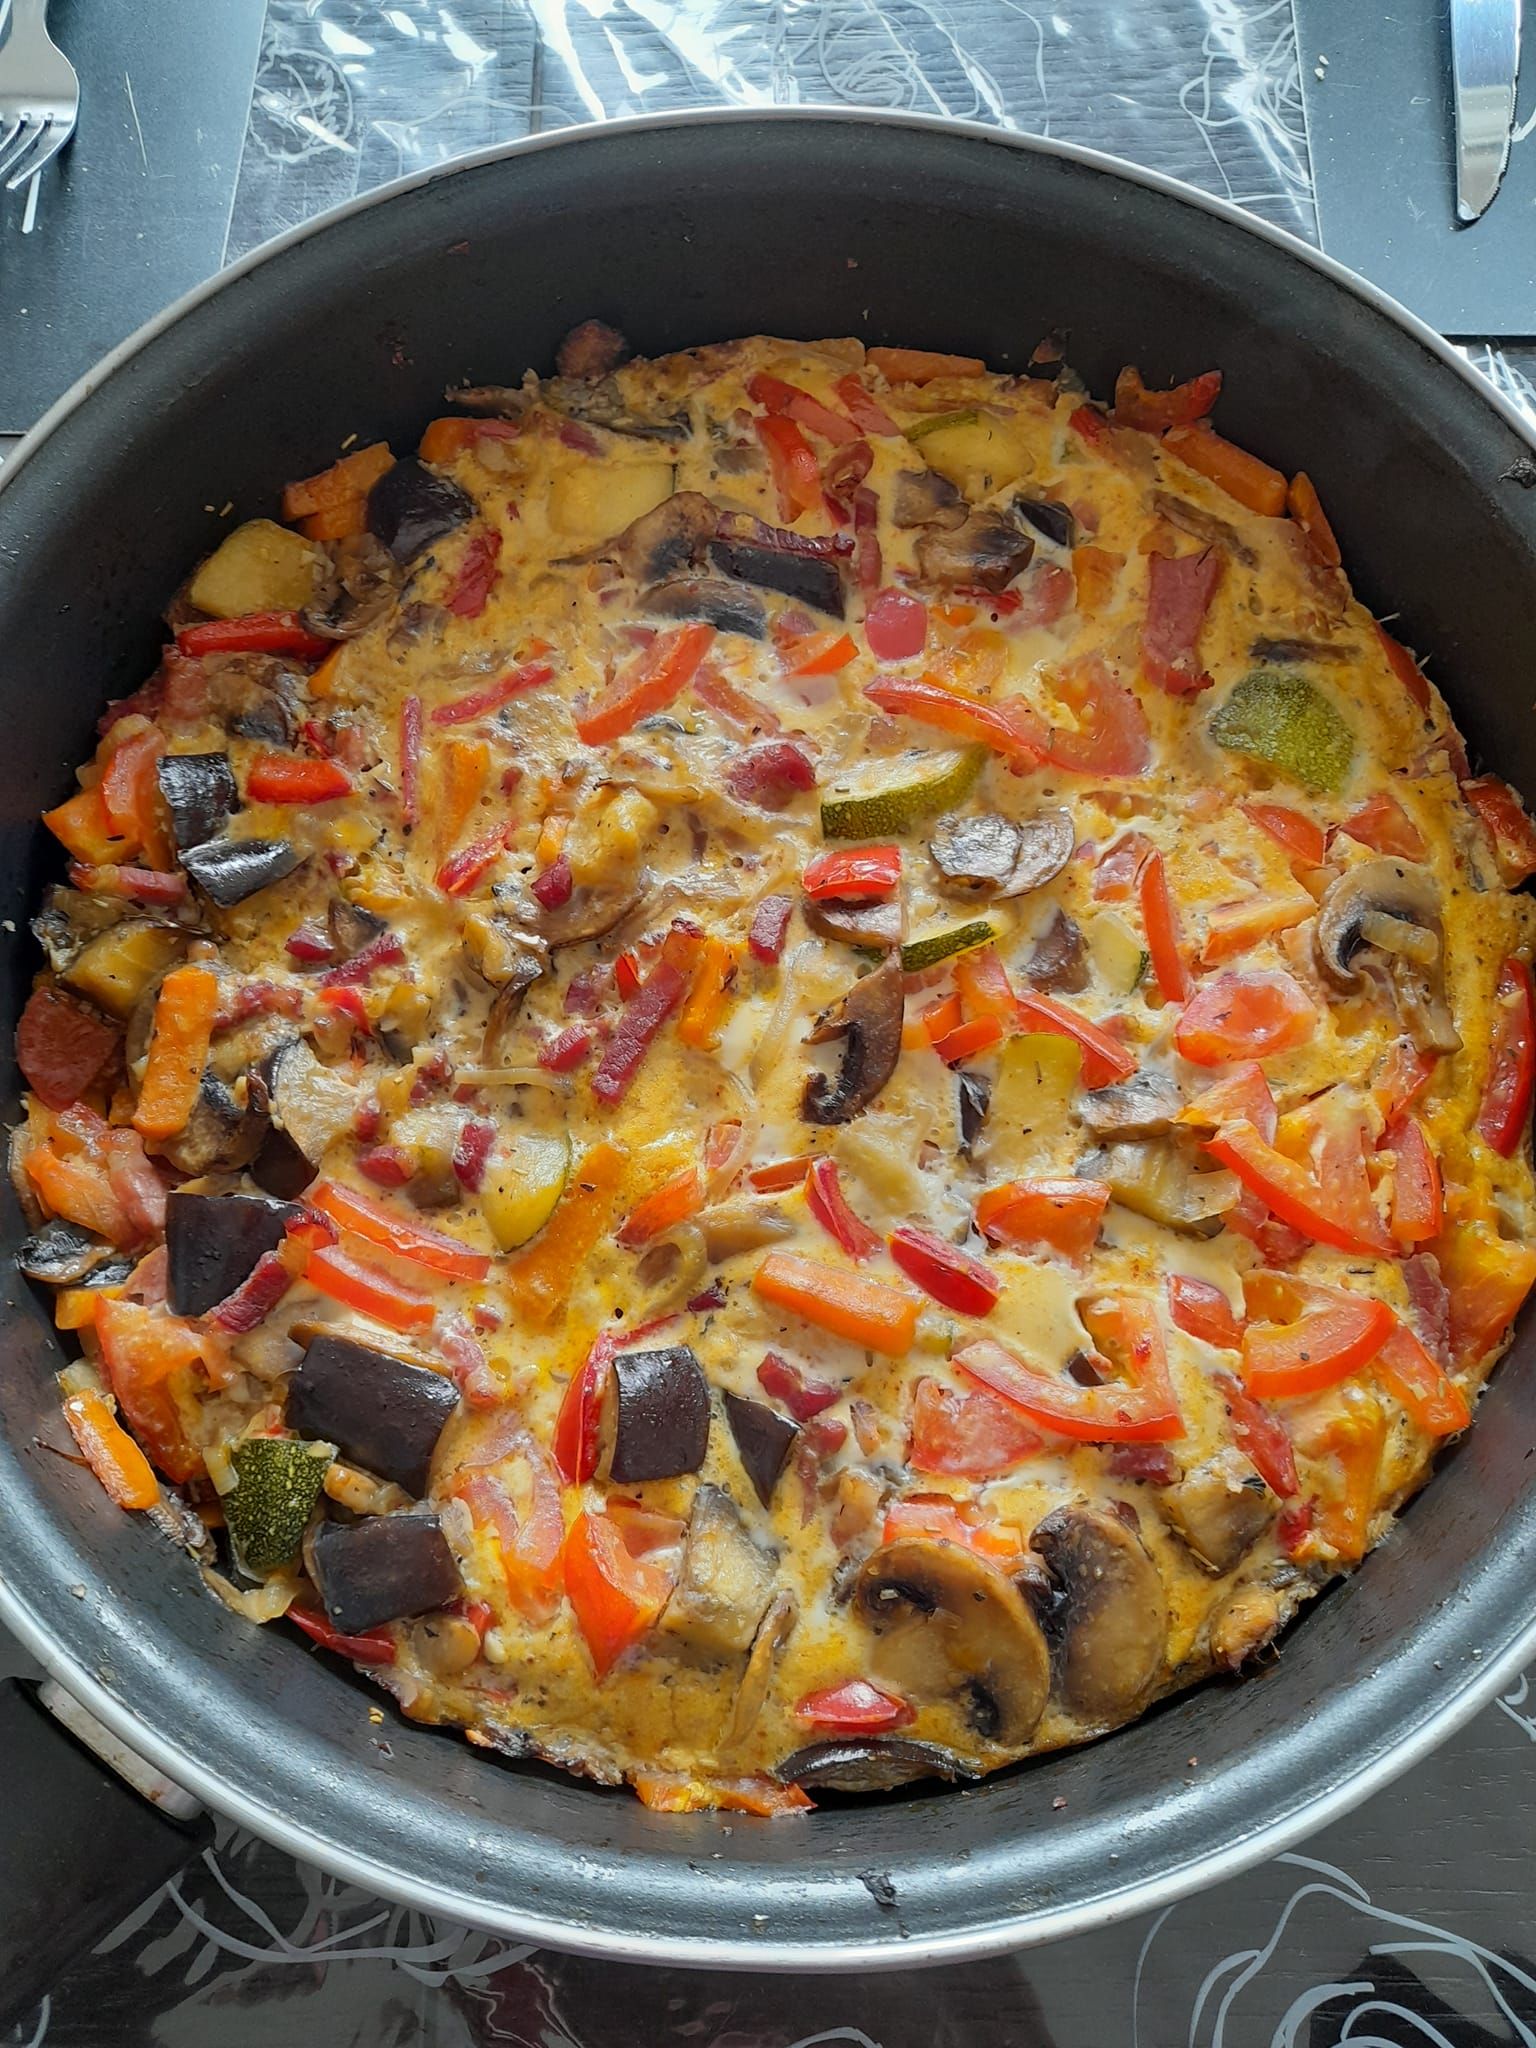 Tortilla-style fried vegetables